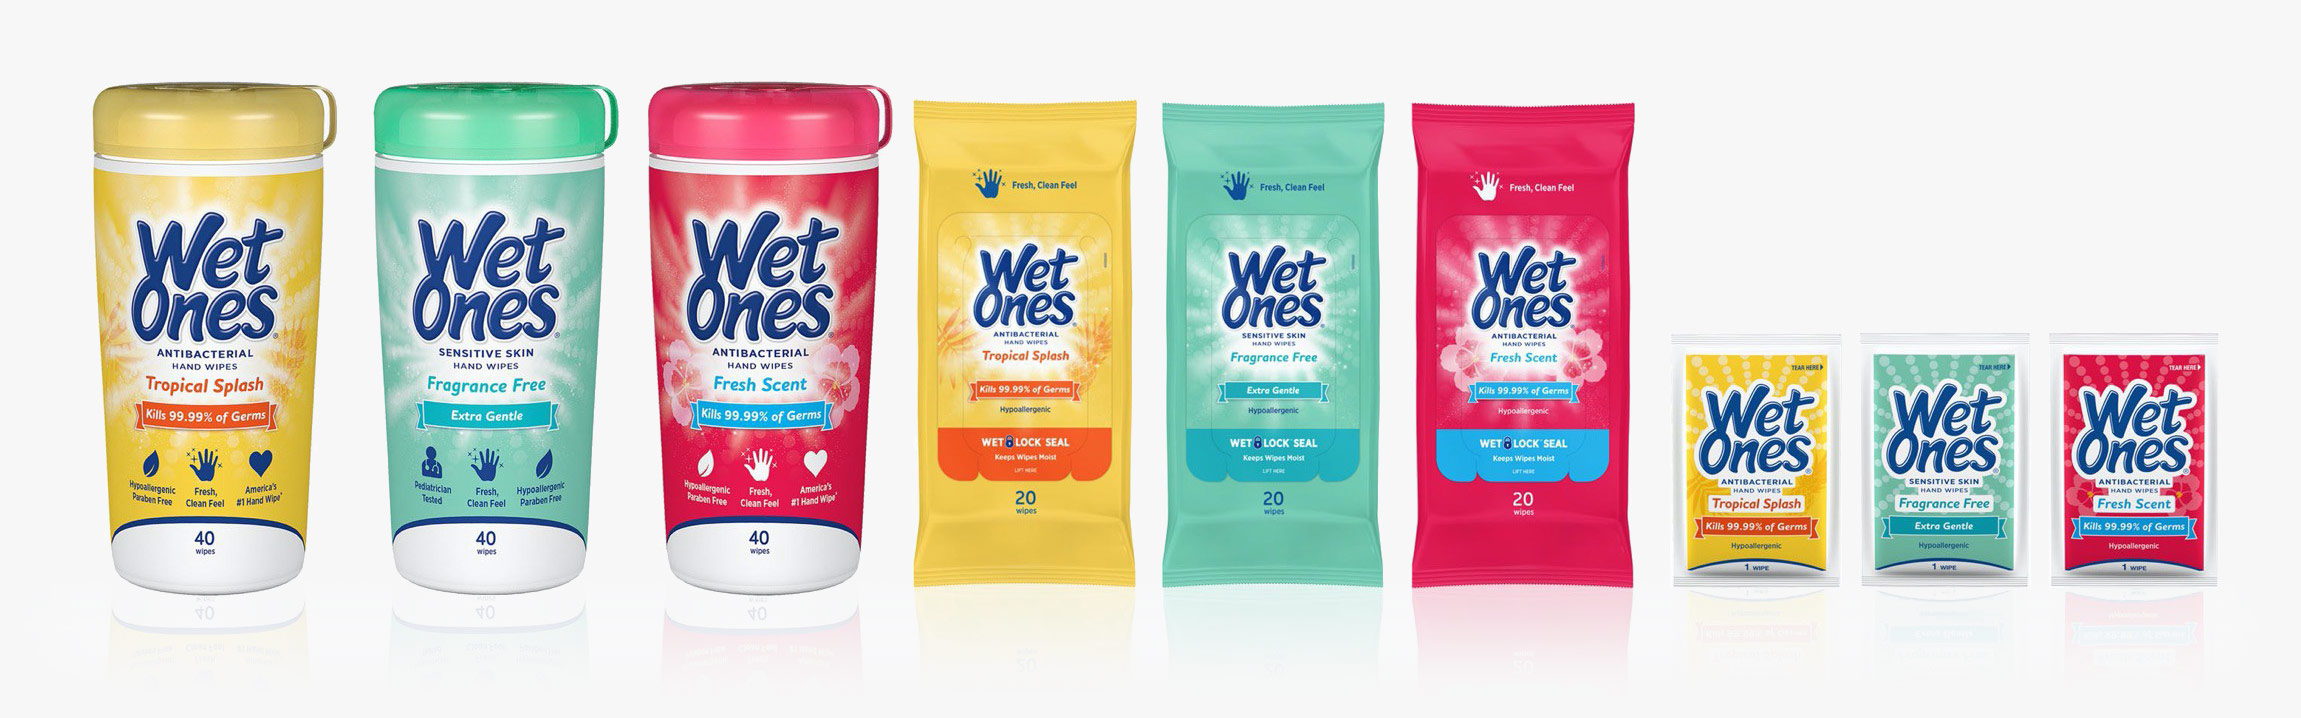 wet ones packaging system